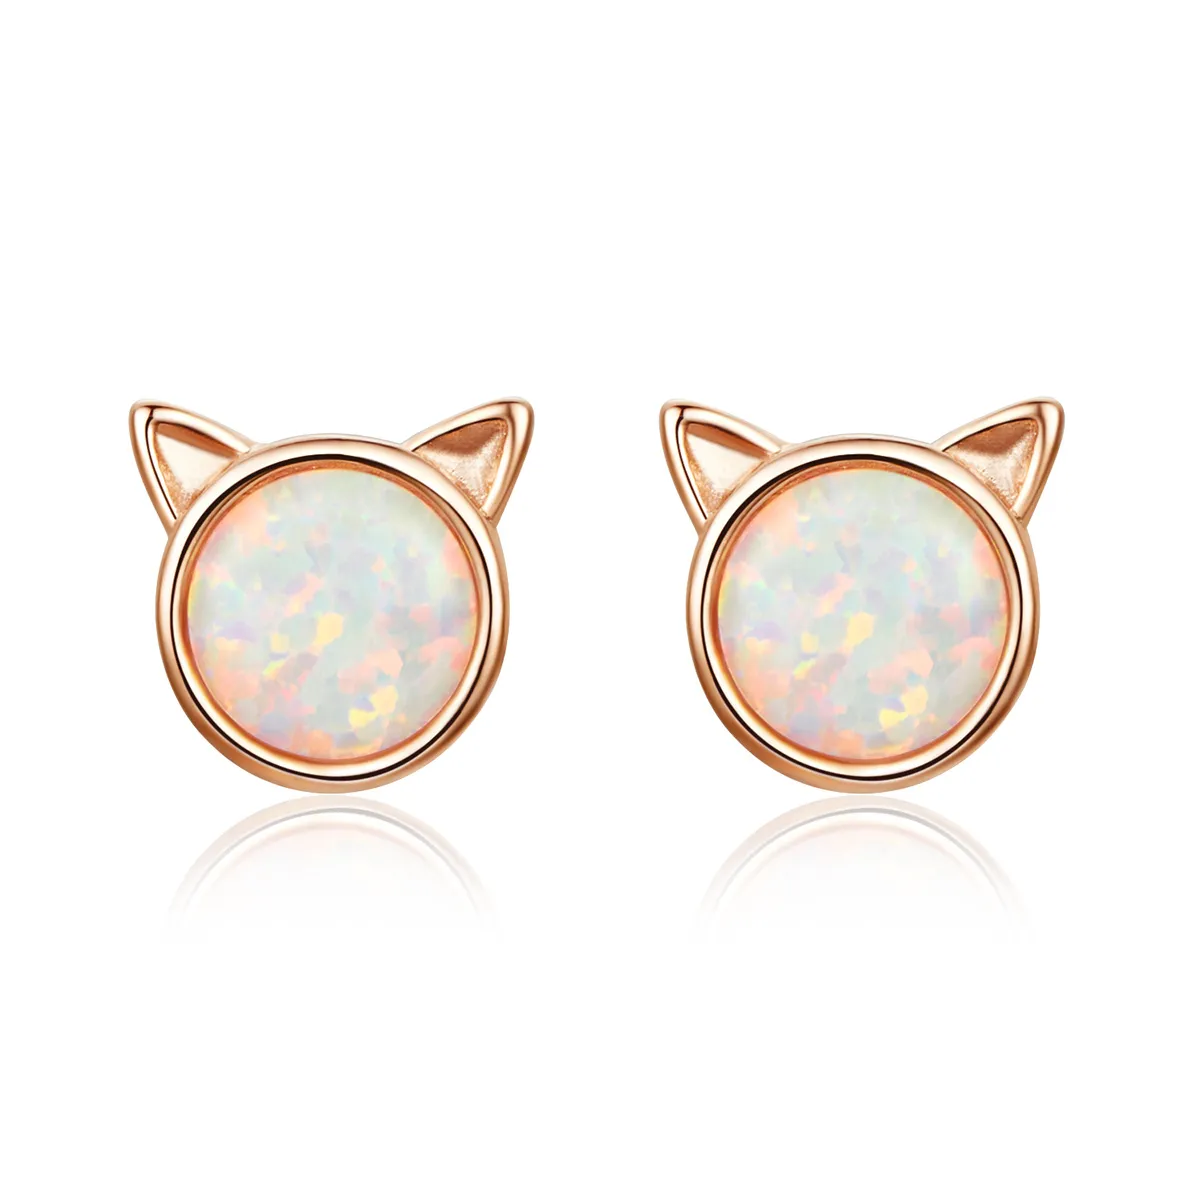 Pandora Style Rose Gold Meow Star Stud Earrings - SCE538